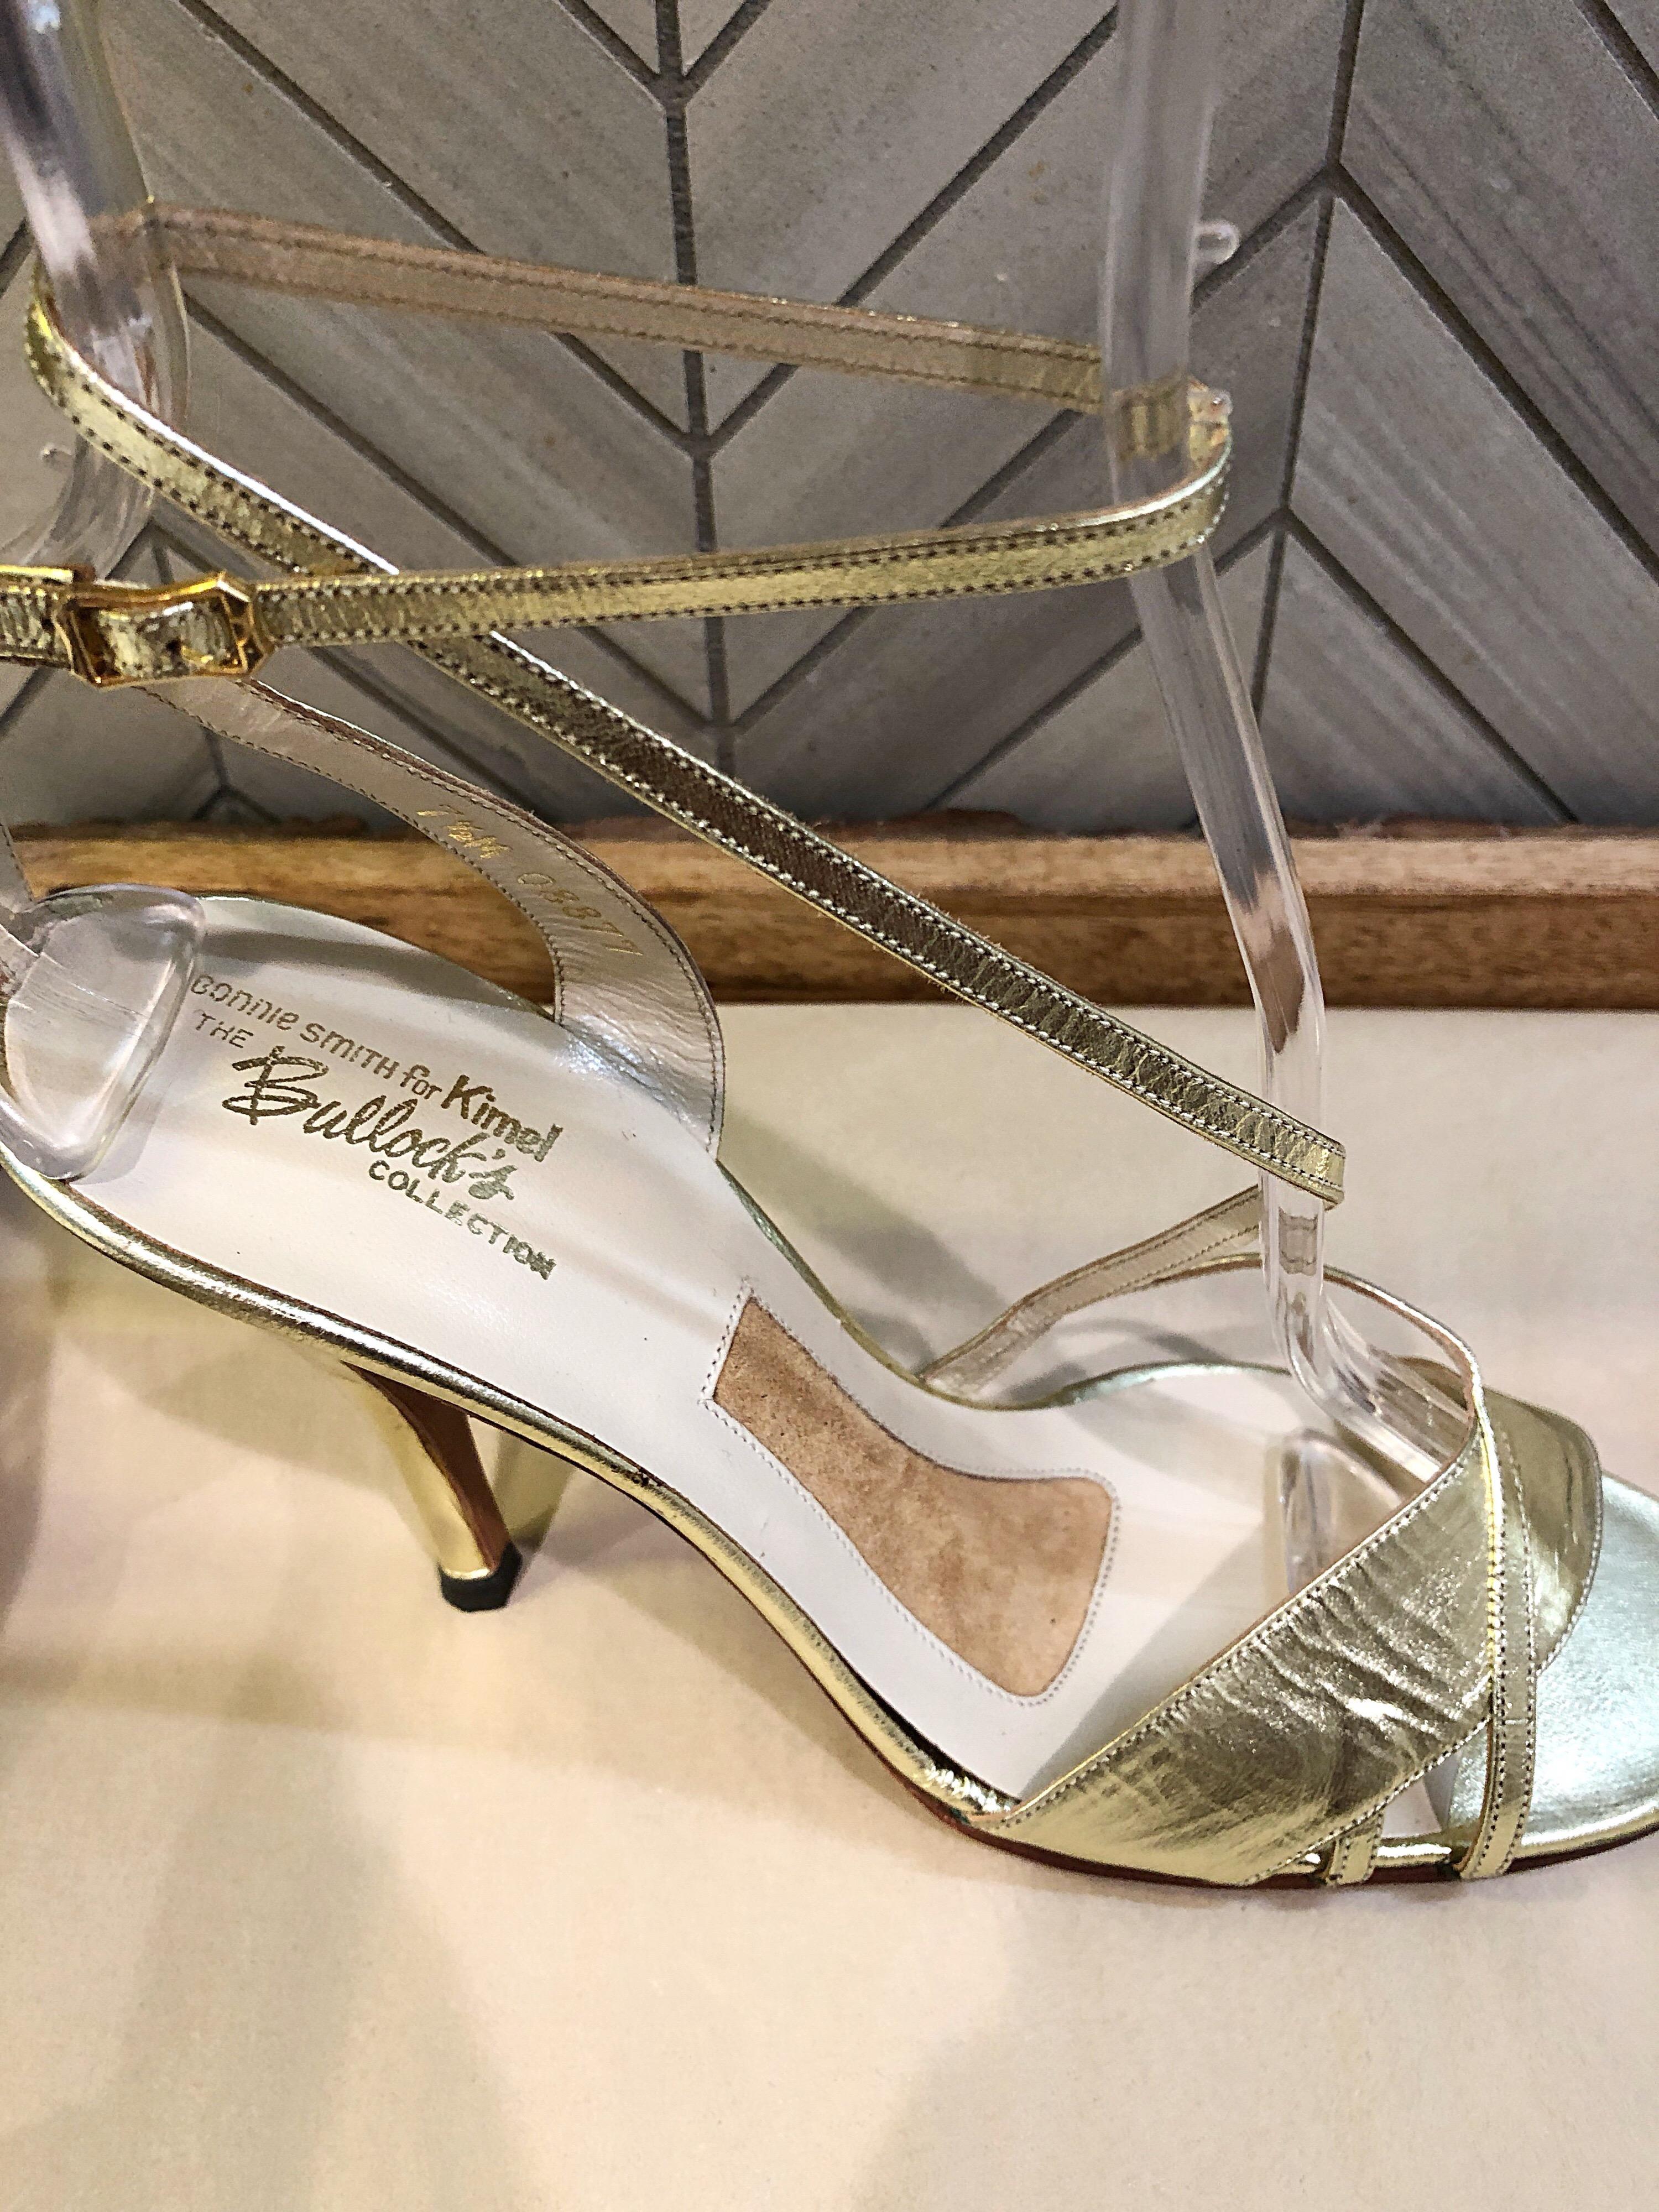 New 1970s Connie Smith Bullocks Wilshire Size 7.5 Gold Metallic Strappy Heels For Sale 3